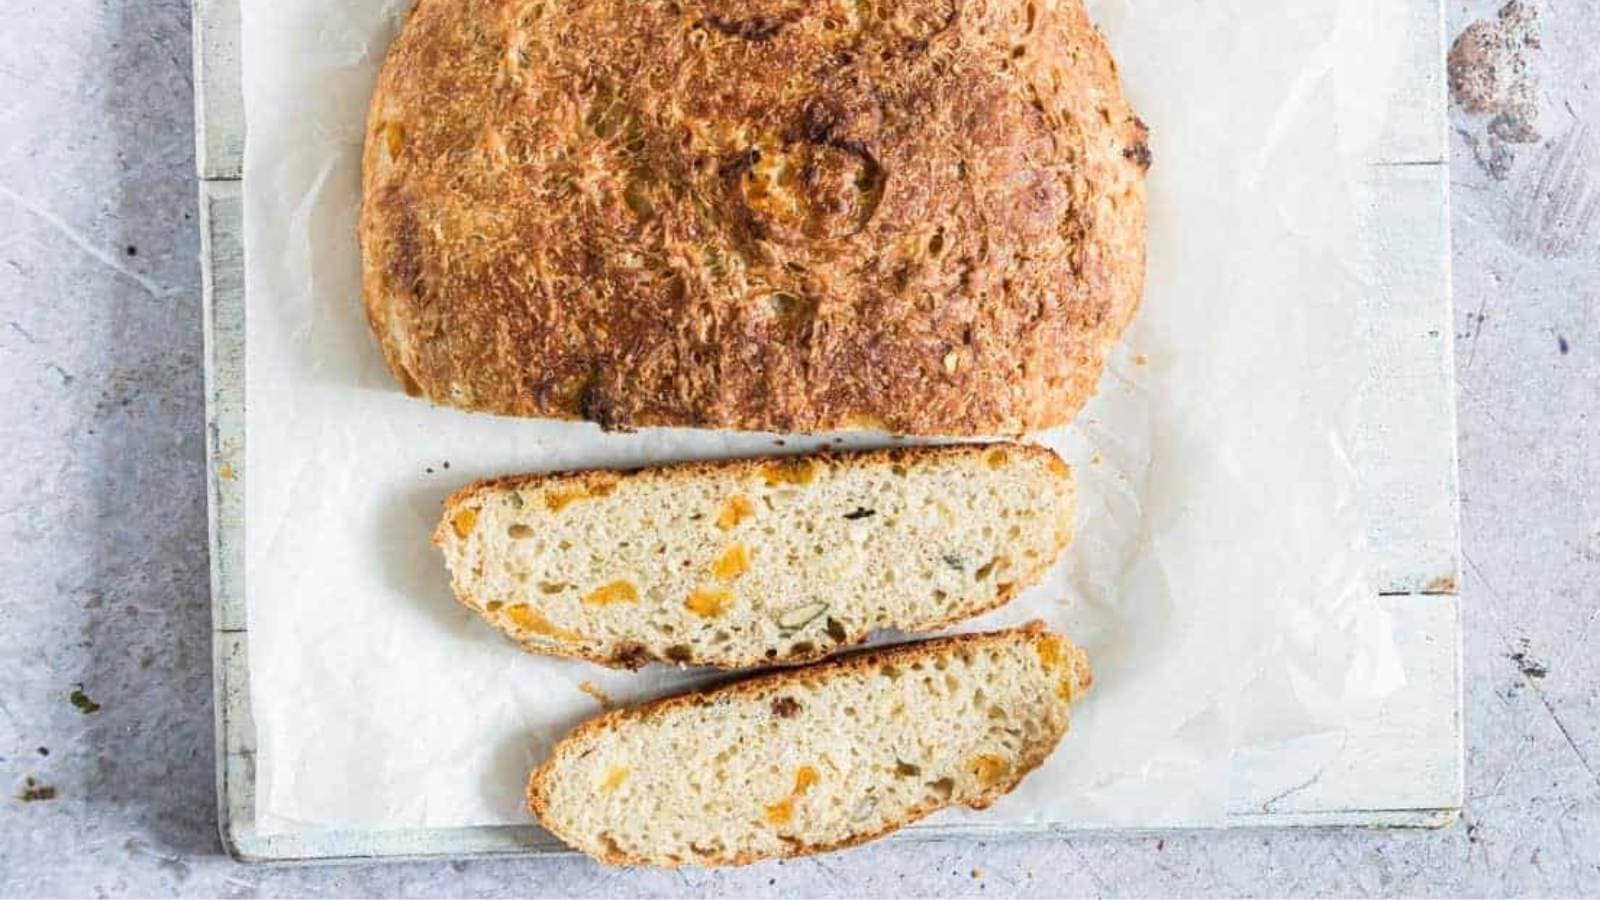 Instant Pot Muesli Bread recipe by Recipes From A Pantry.